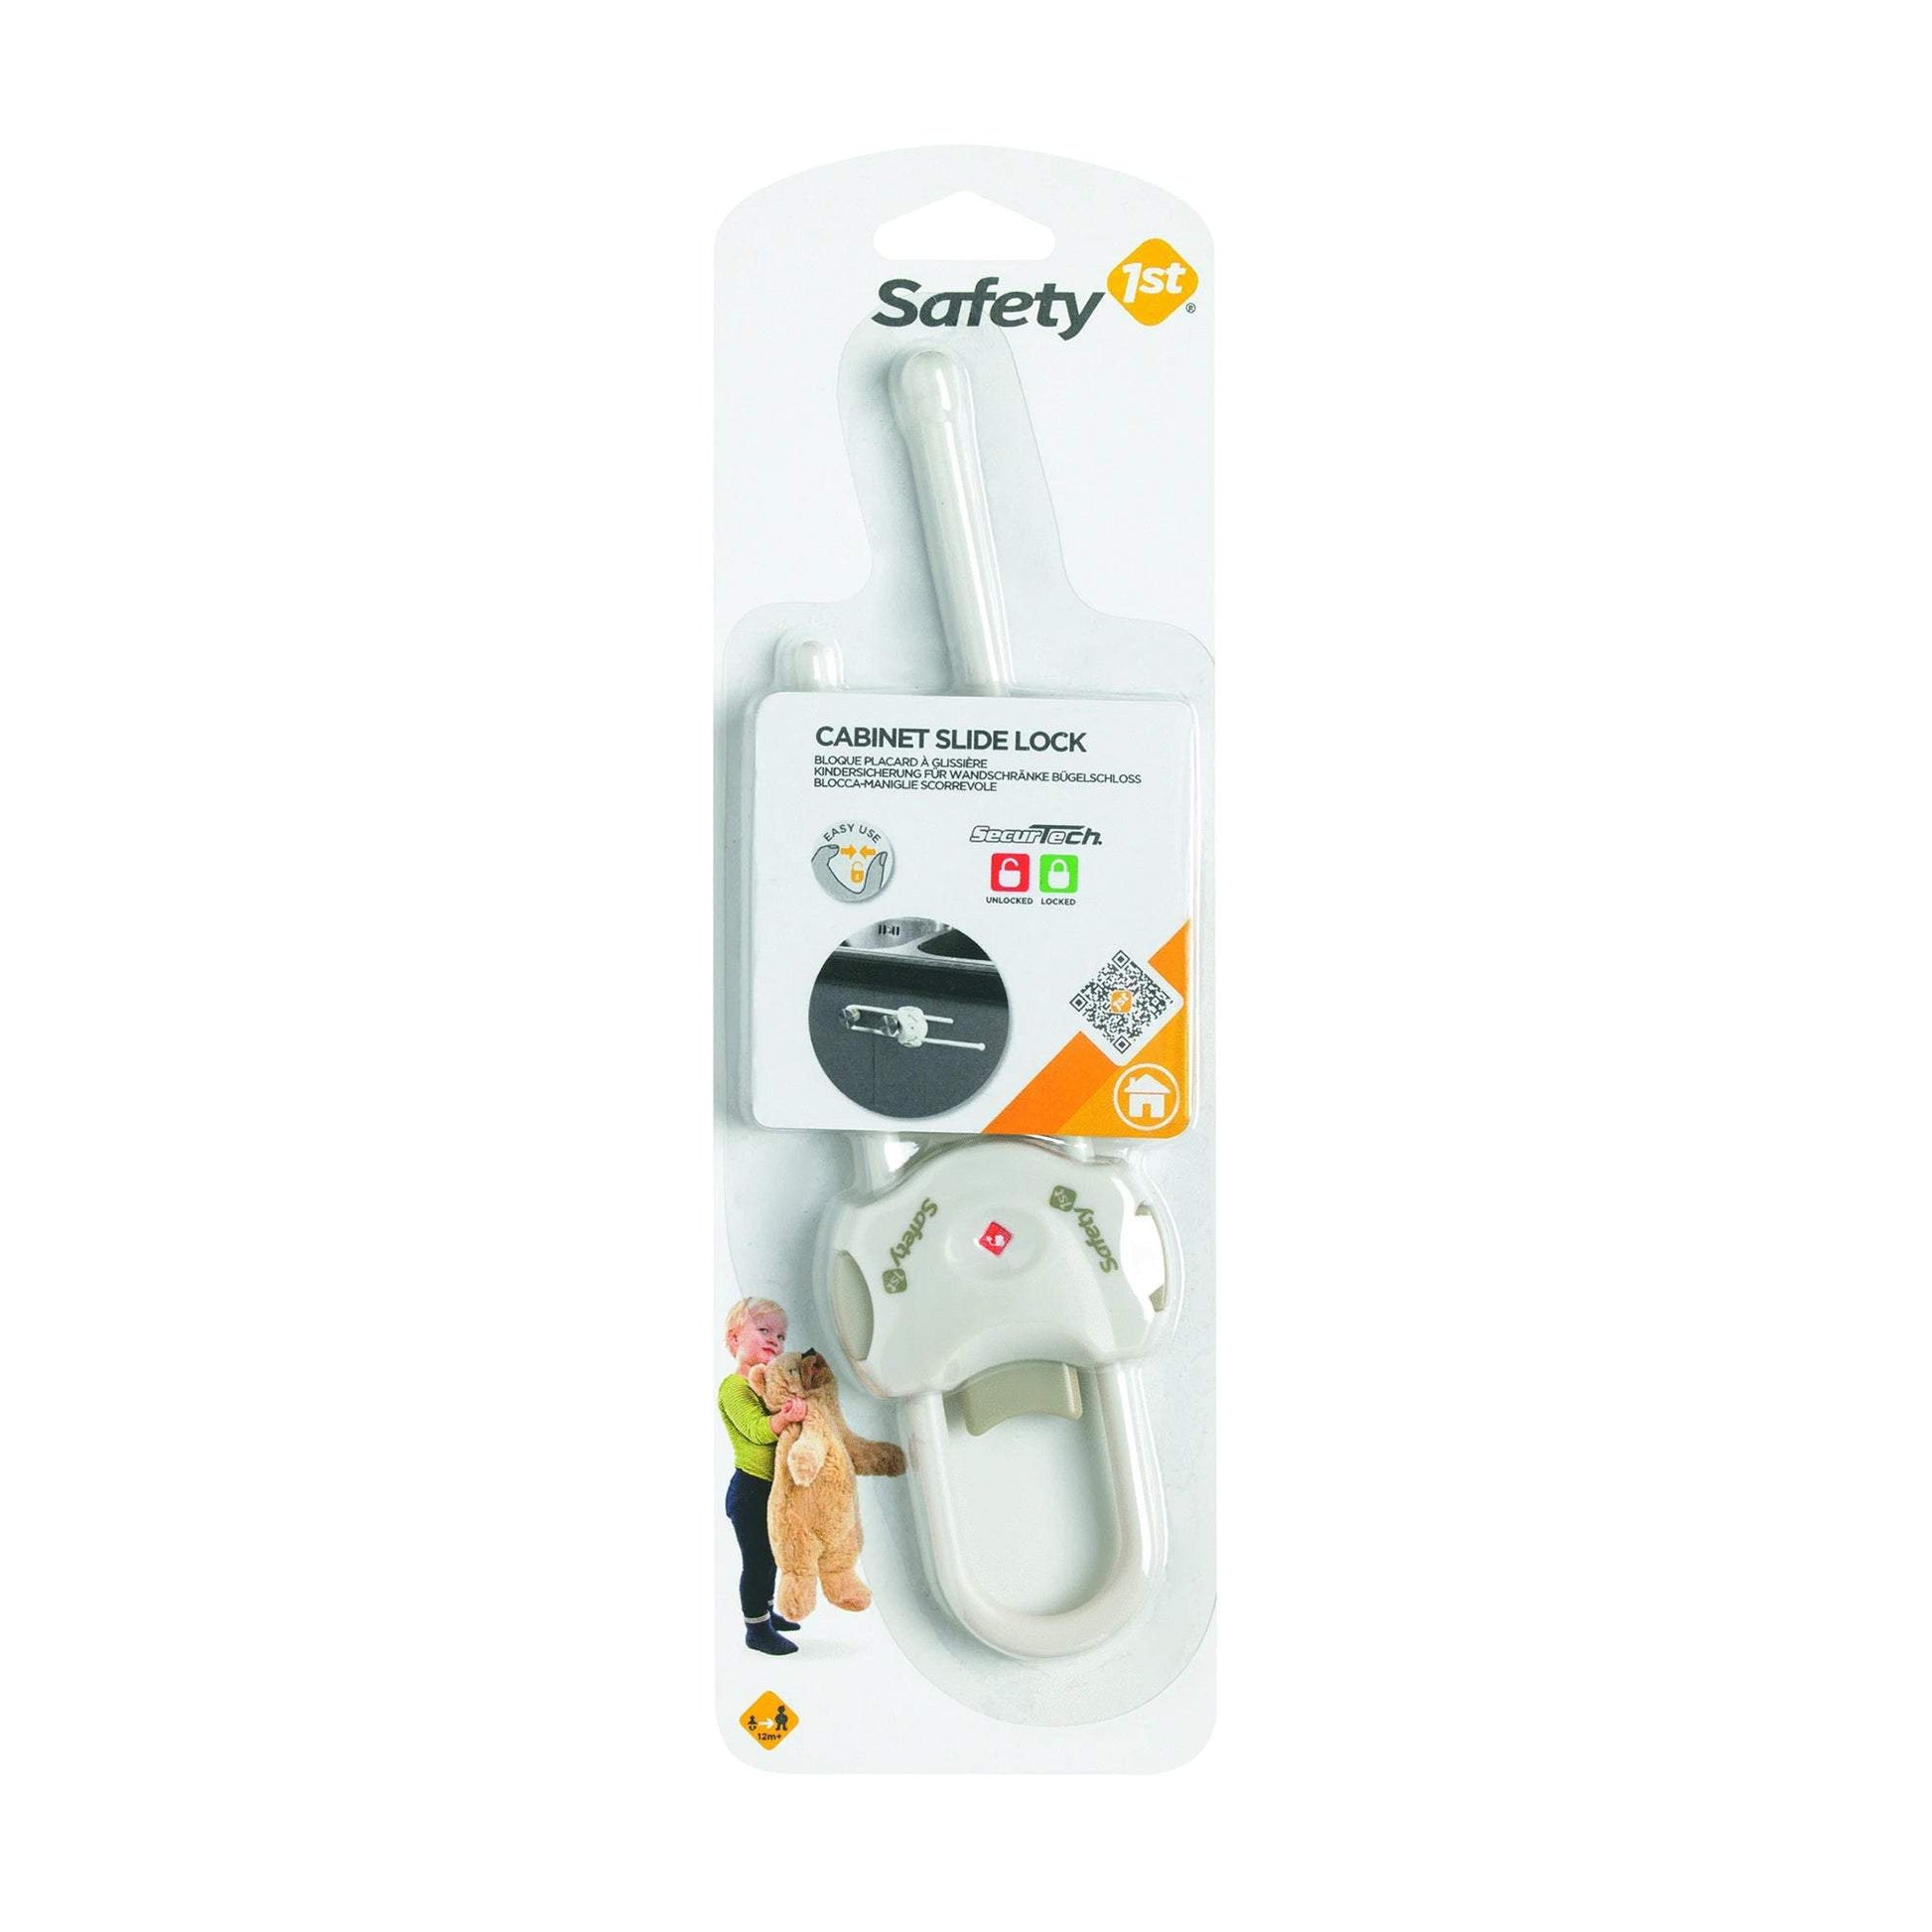 Safety 1st White Color Cabinet Slide Lock || 6months to 48months - Toys4All.in